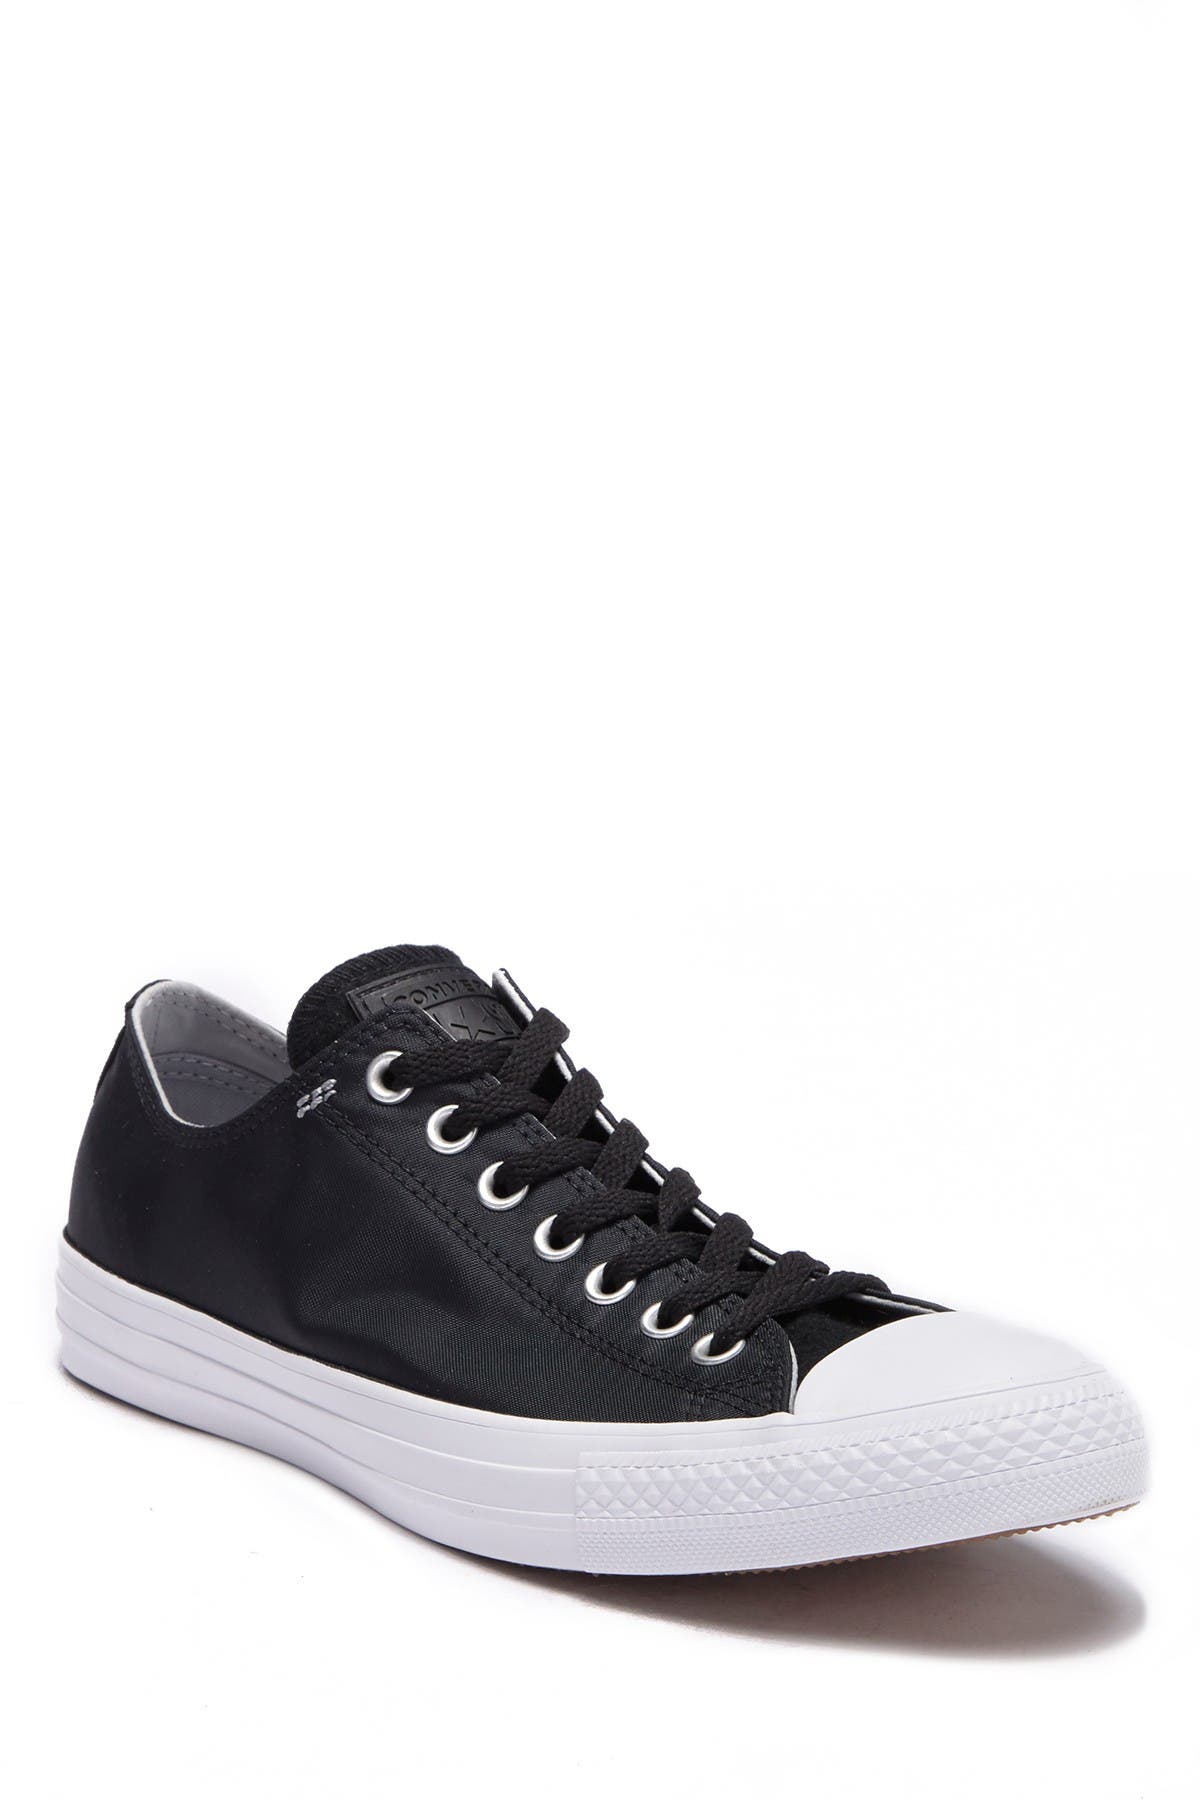 converse oxford leather